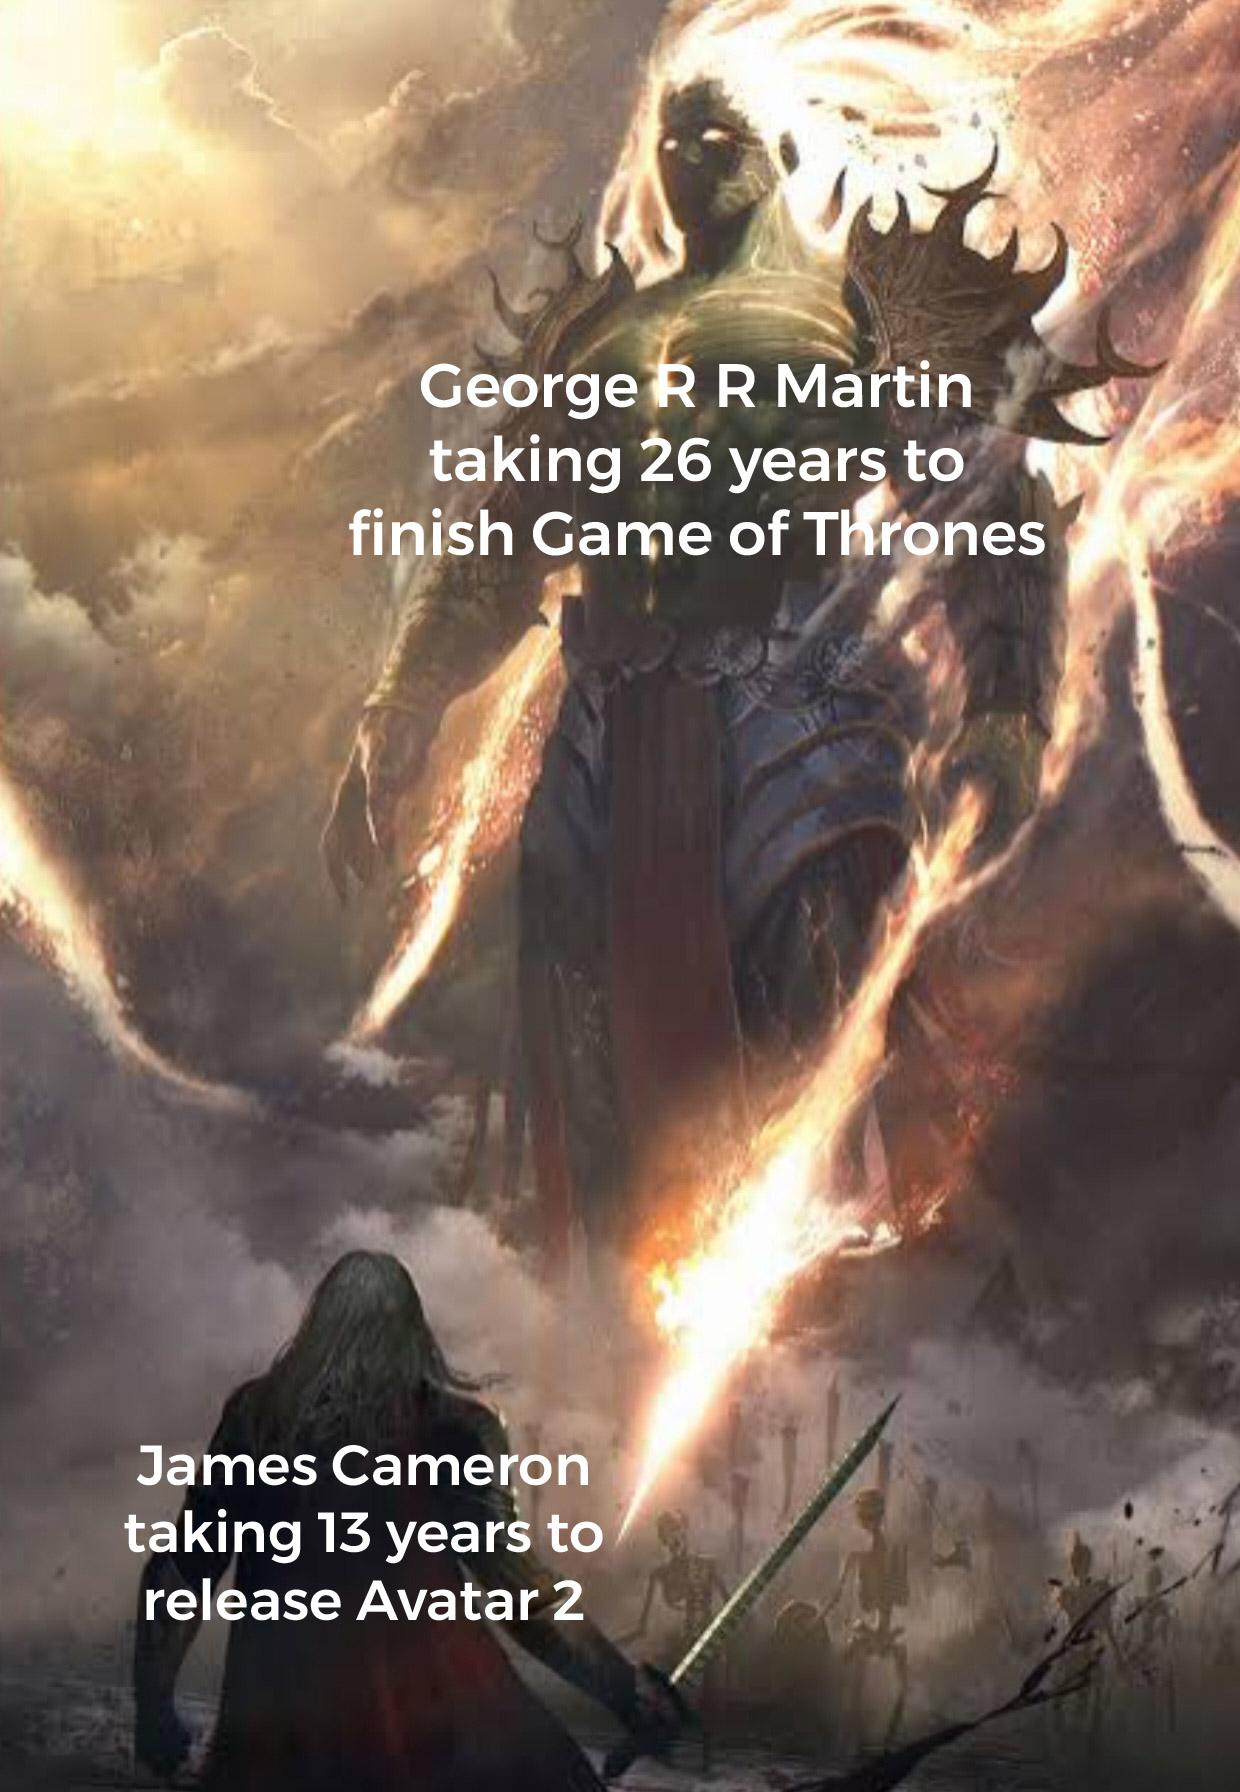 funny memes - dank memes - sun god fantasy art - George Rr Martin taking 26 years to finish Game of Thrones James Cameron taking 13 years to release Avatar 2